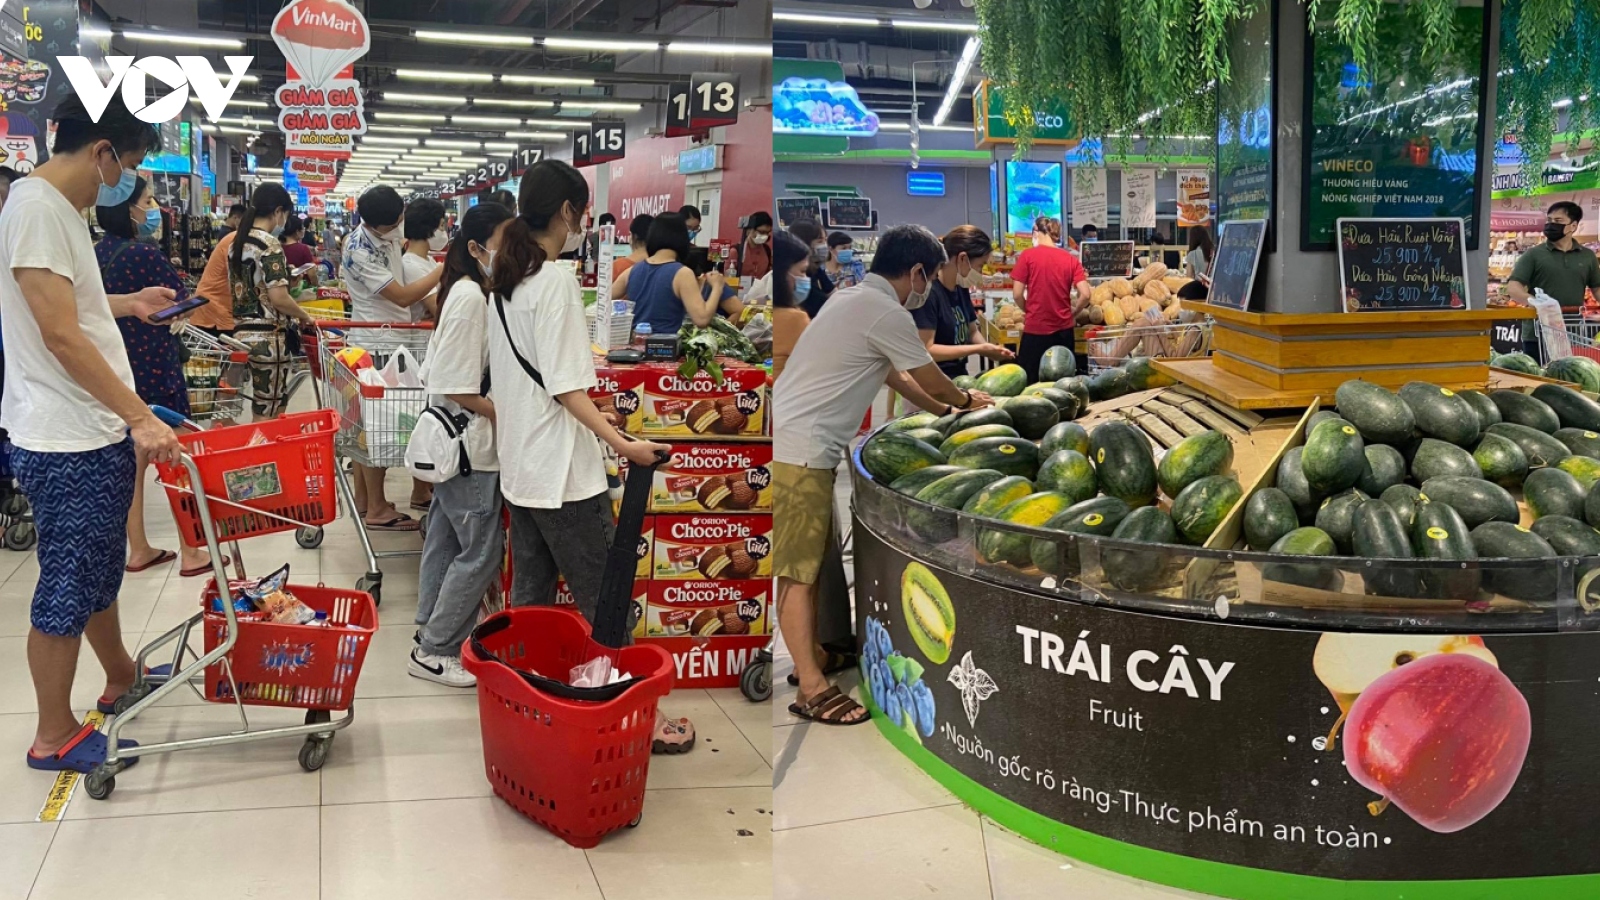 Hanoi residents hoard food, essential goods in ample supply